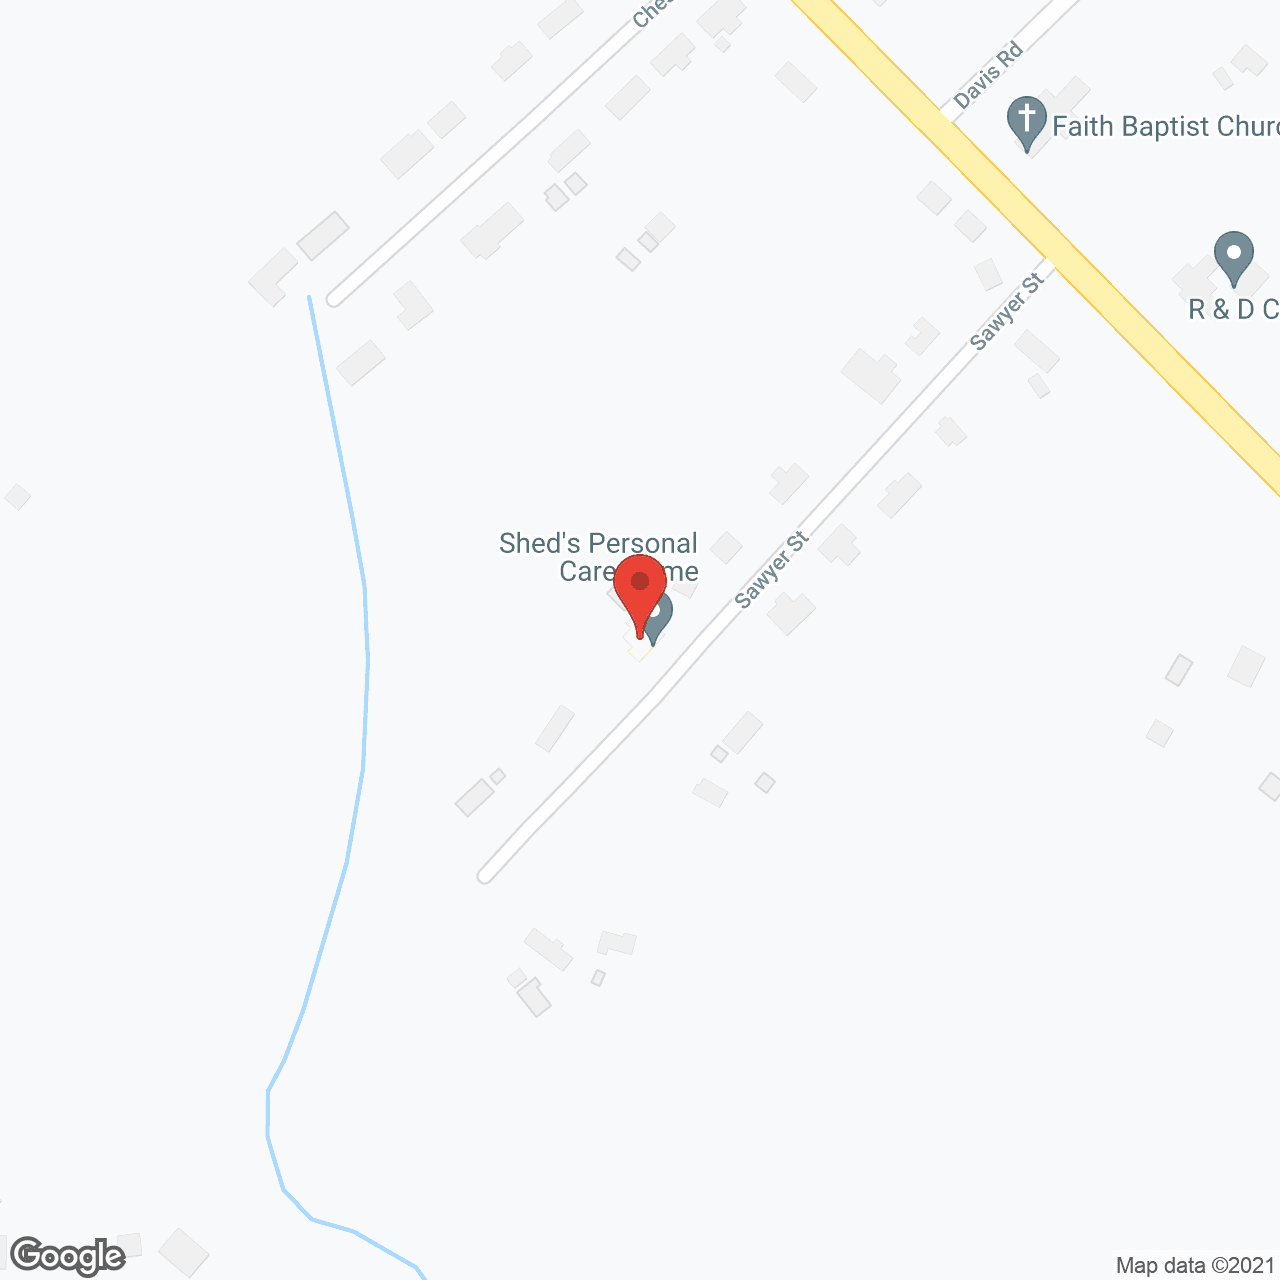 Shed's Personal Care Home in google map